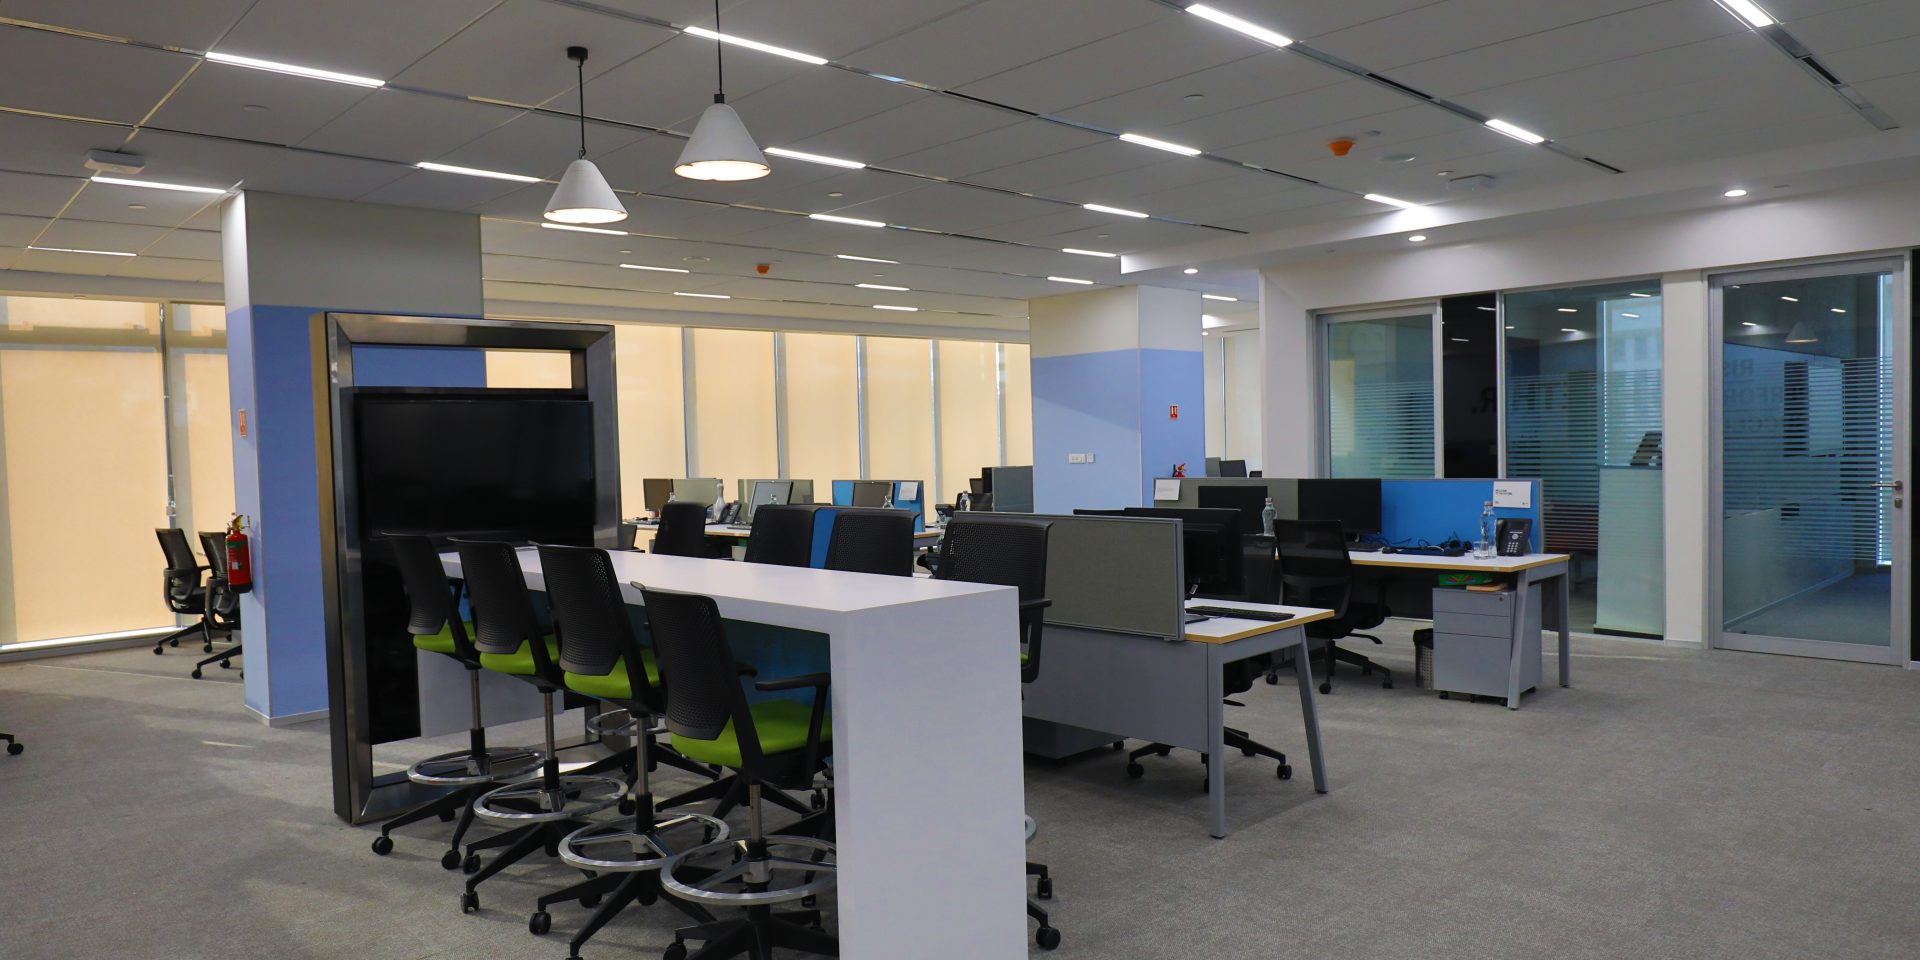 This picture shows the Inside of the National Sales Company in India.